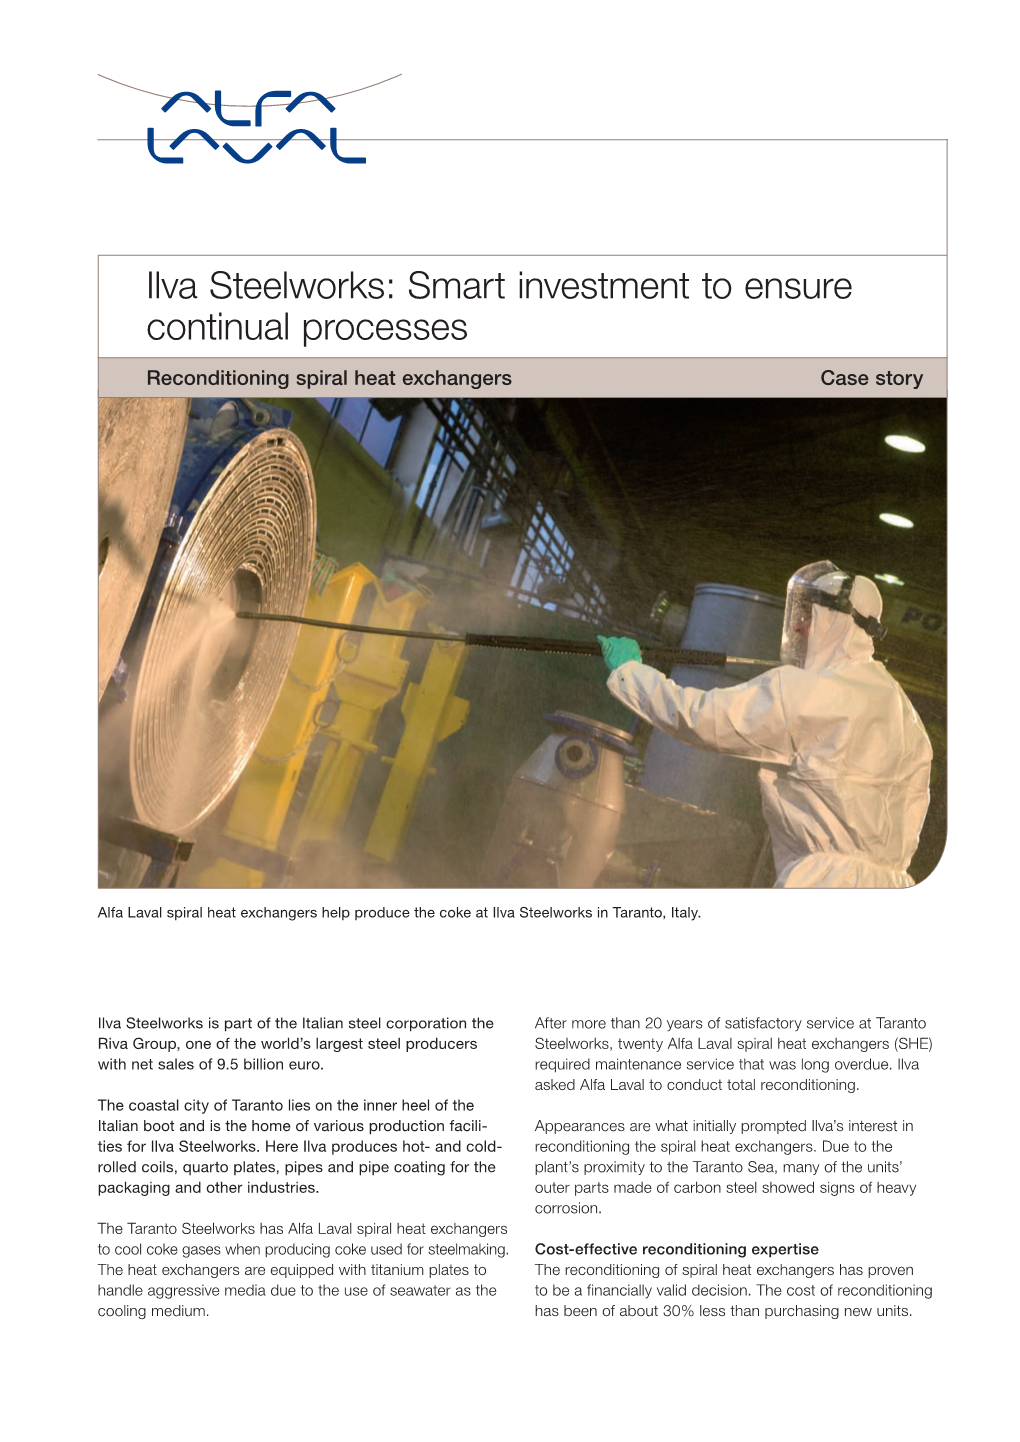 Ilva Steelworks: Smart Investment to Ensure Continual Processes